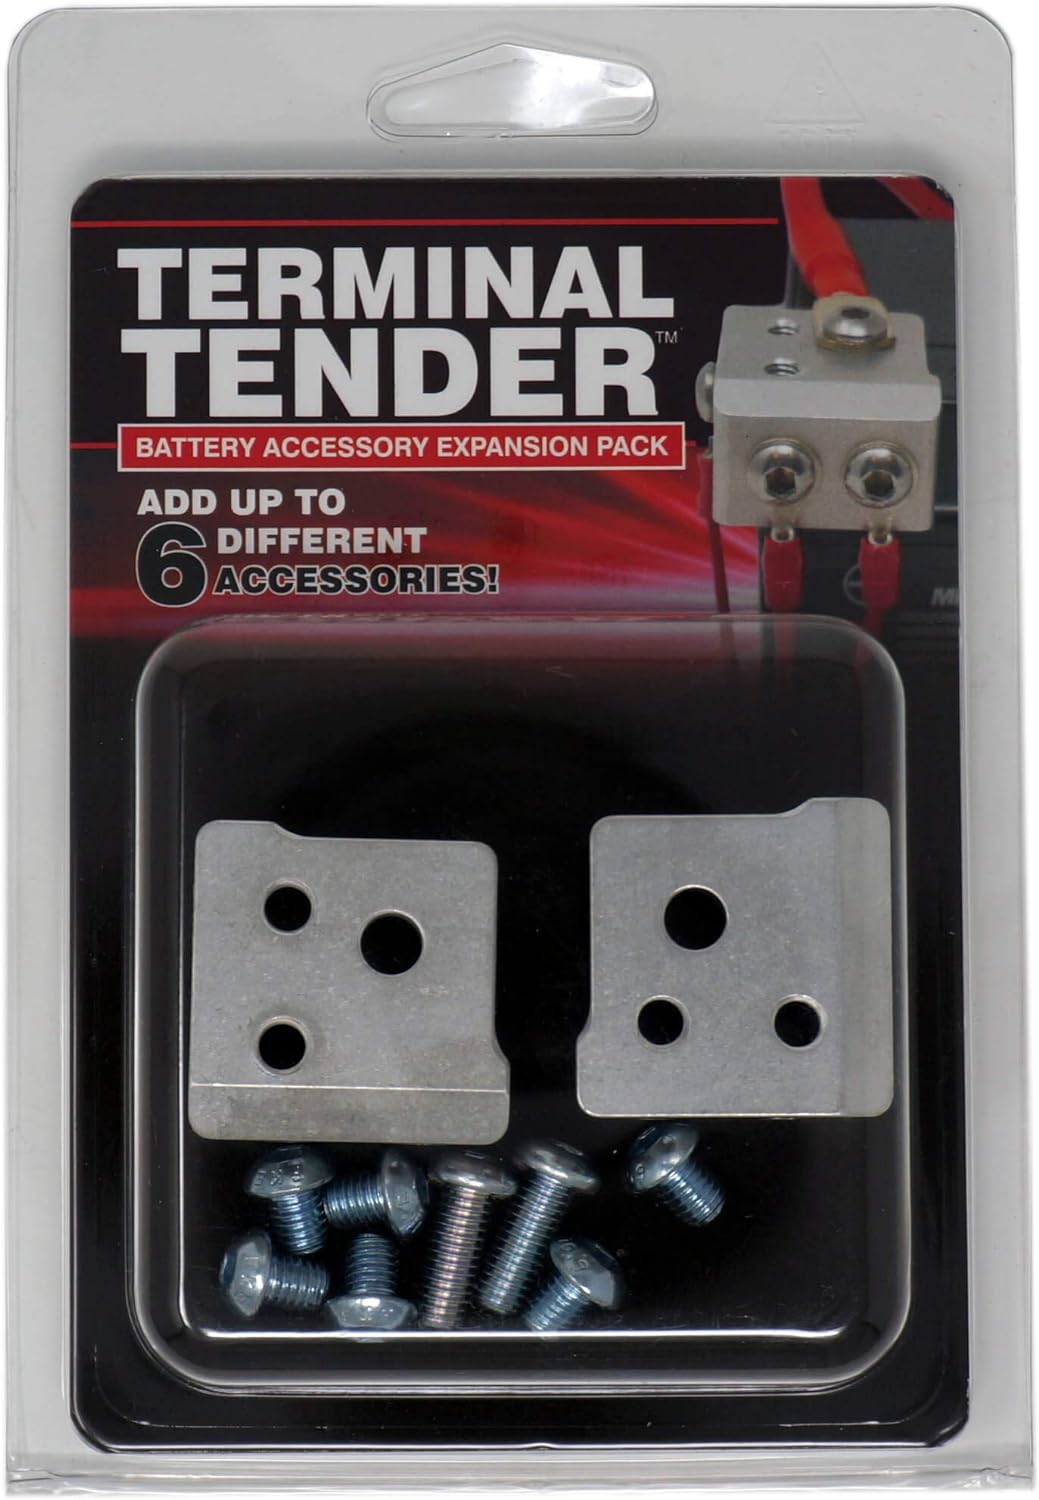 Terminal Tender Battery Life Extension Pack